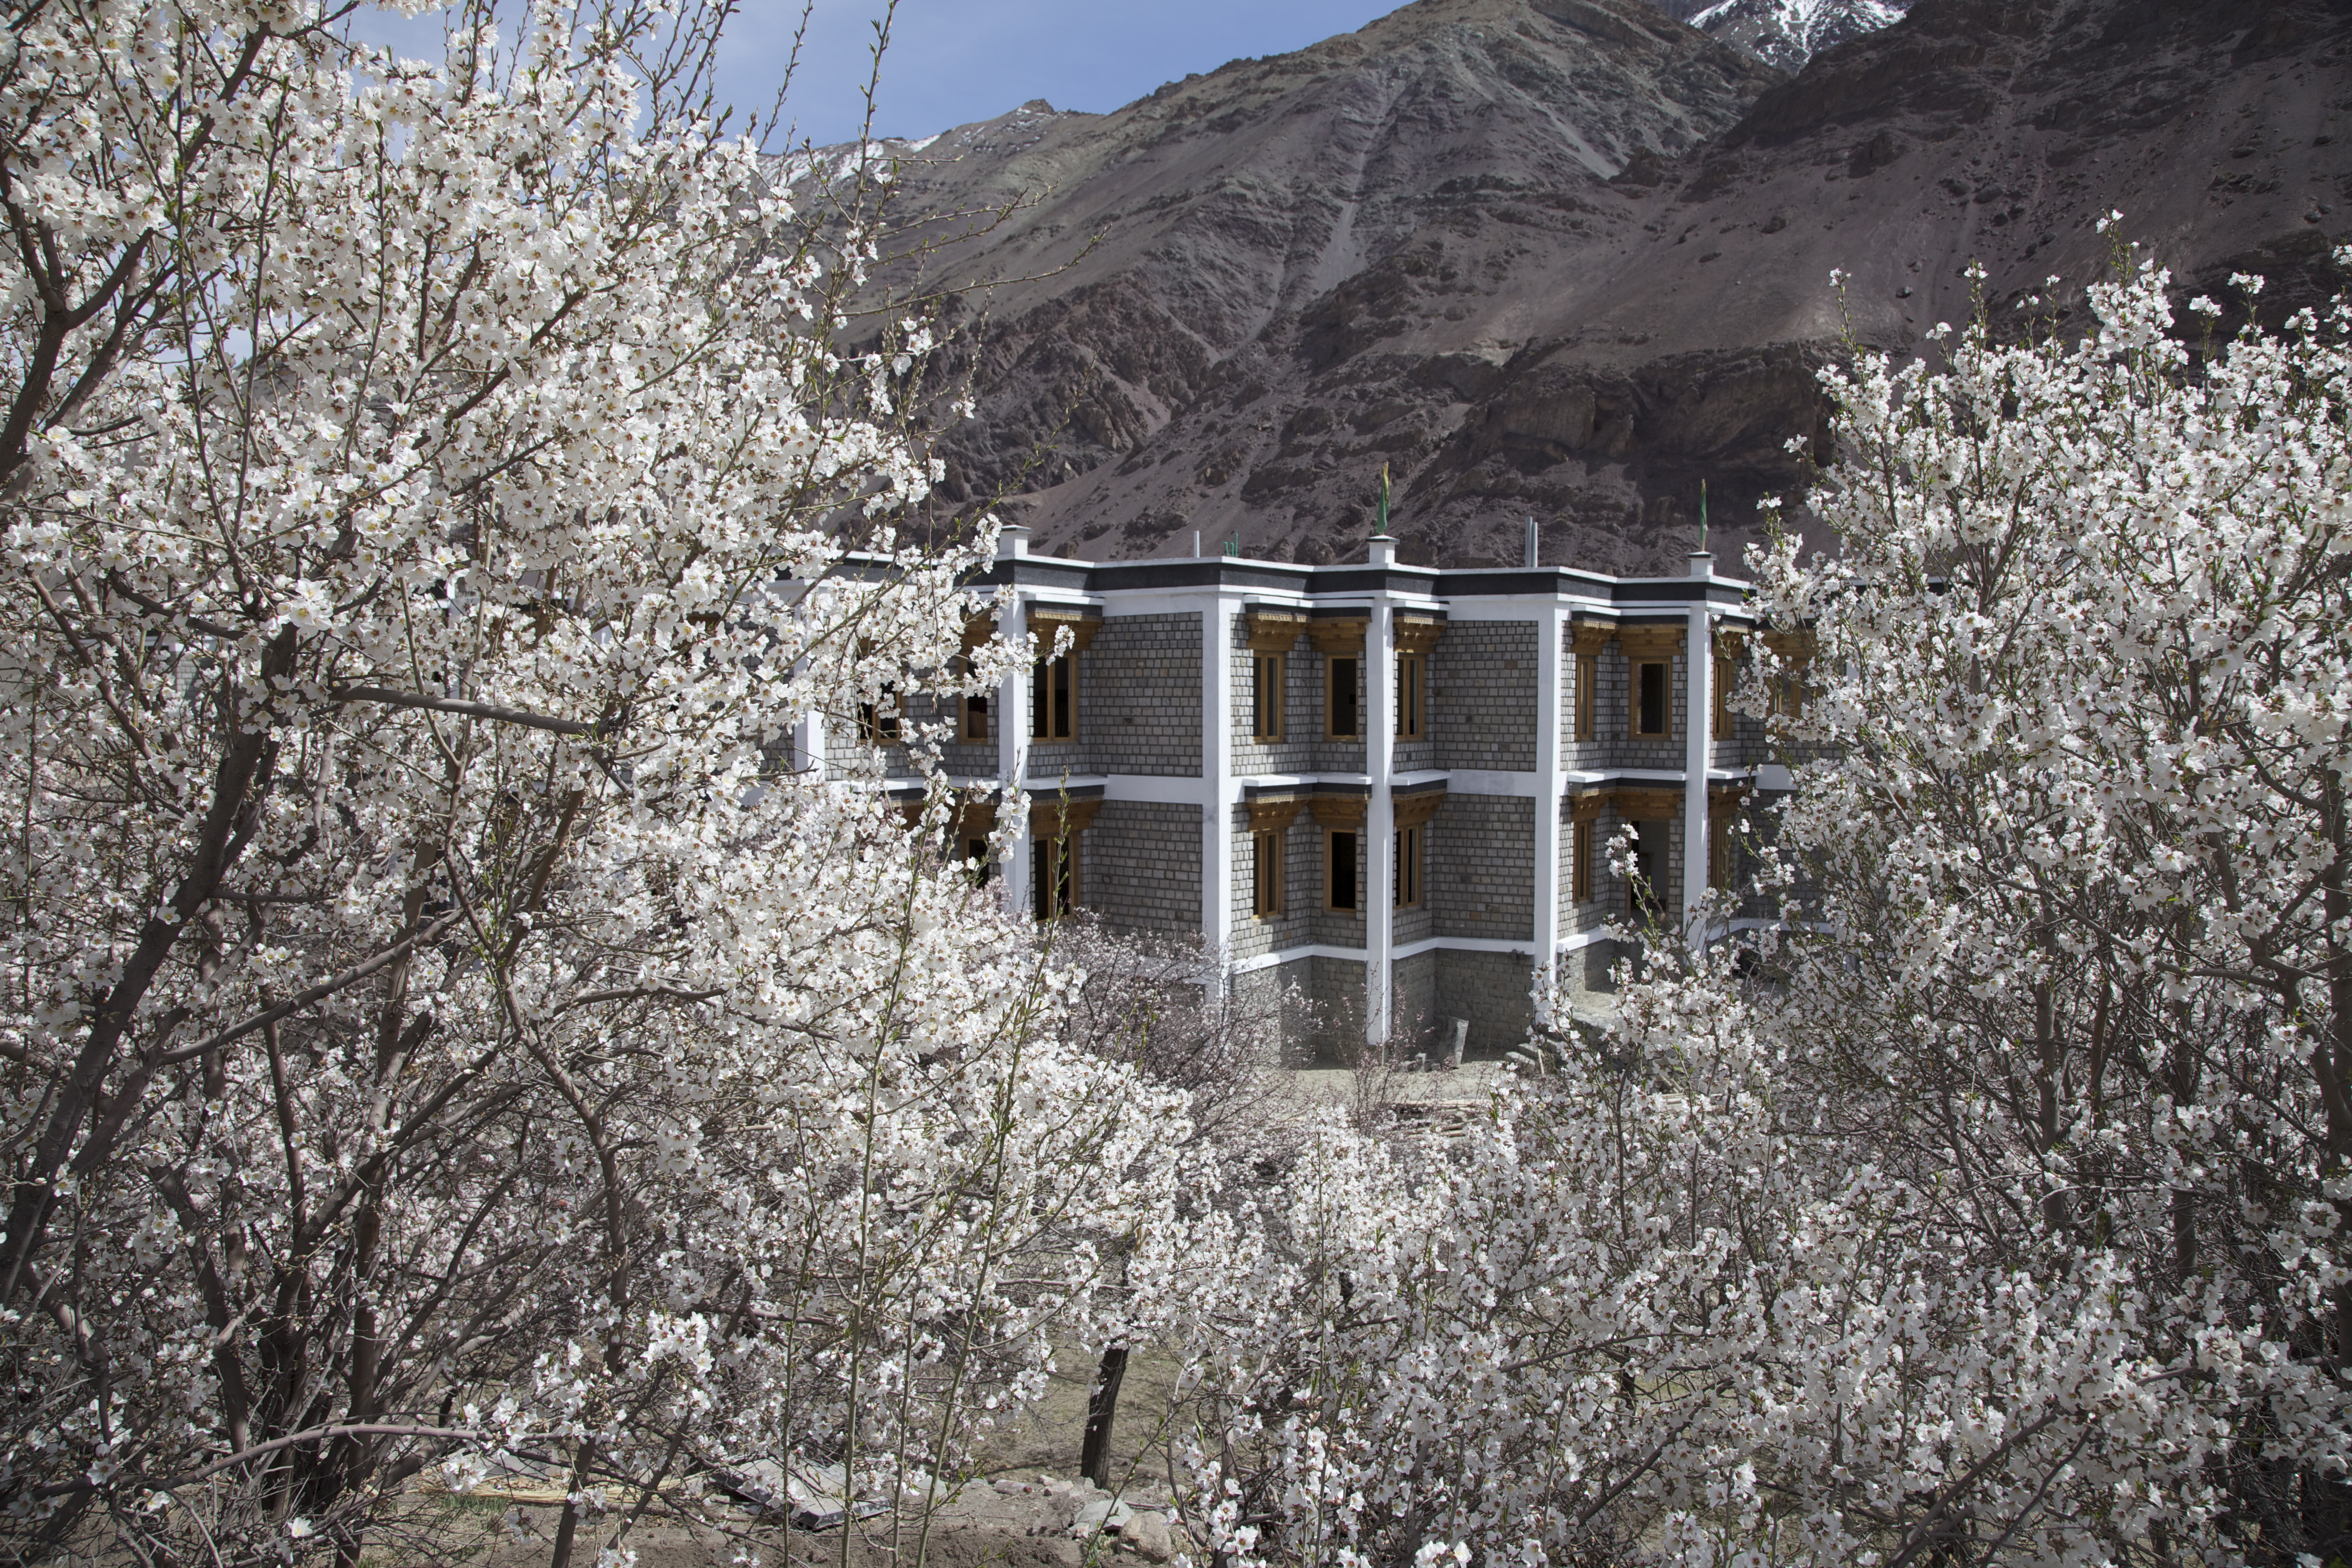 The Apricot Tree Hotel